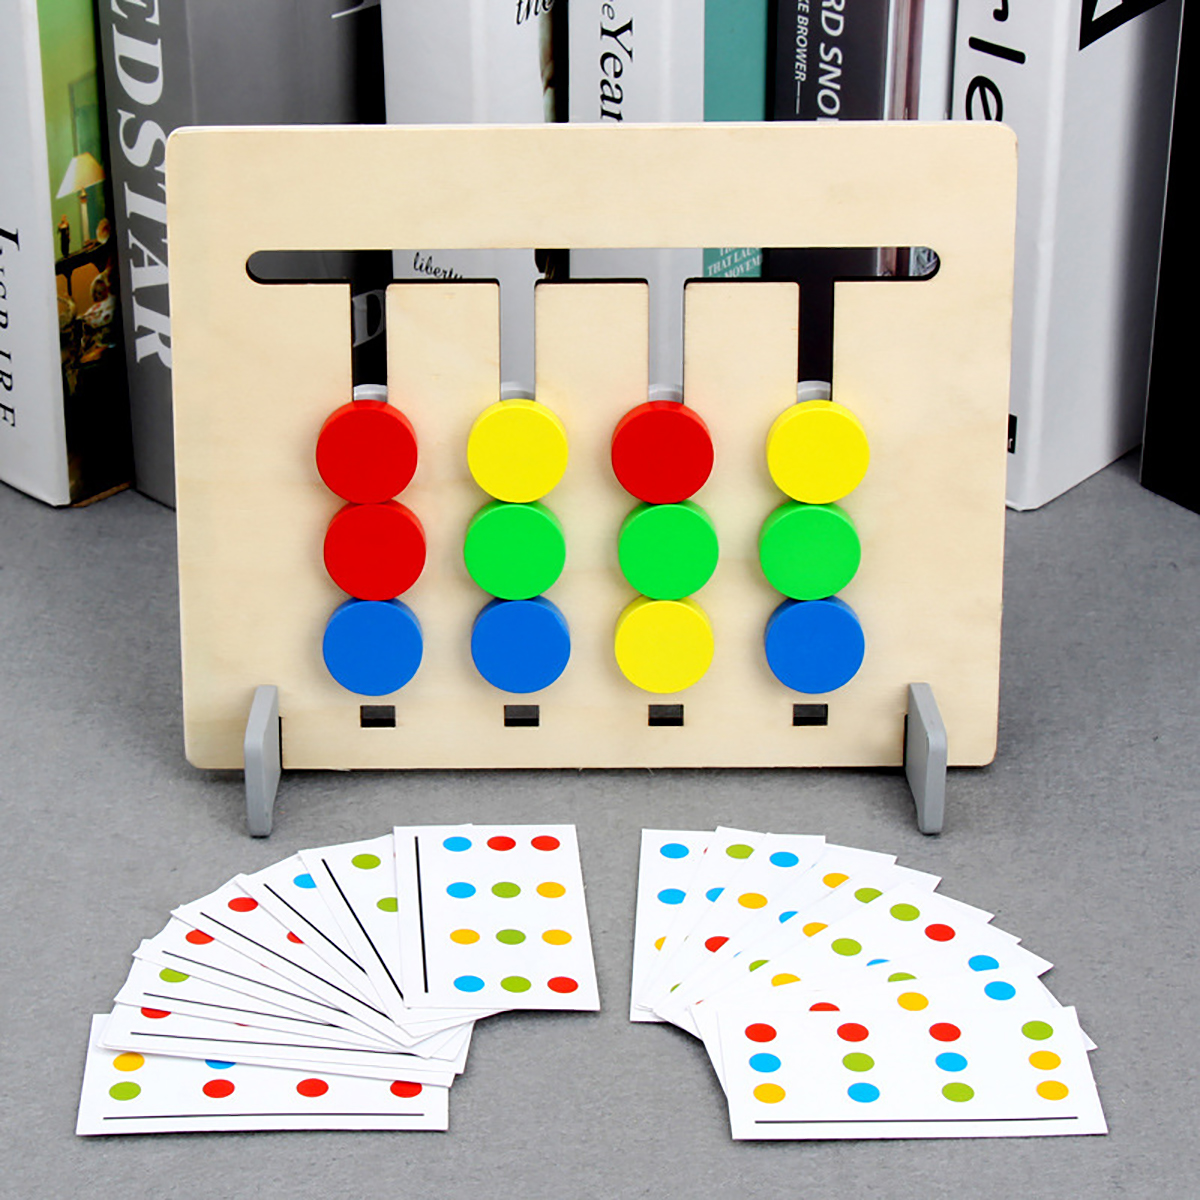 Funny-Double-sided-Color-Fruit-Matching-Game-Children-Wooden-Montessori-Toys-Logical-Reasoning-Train-1674710-7